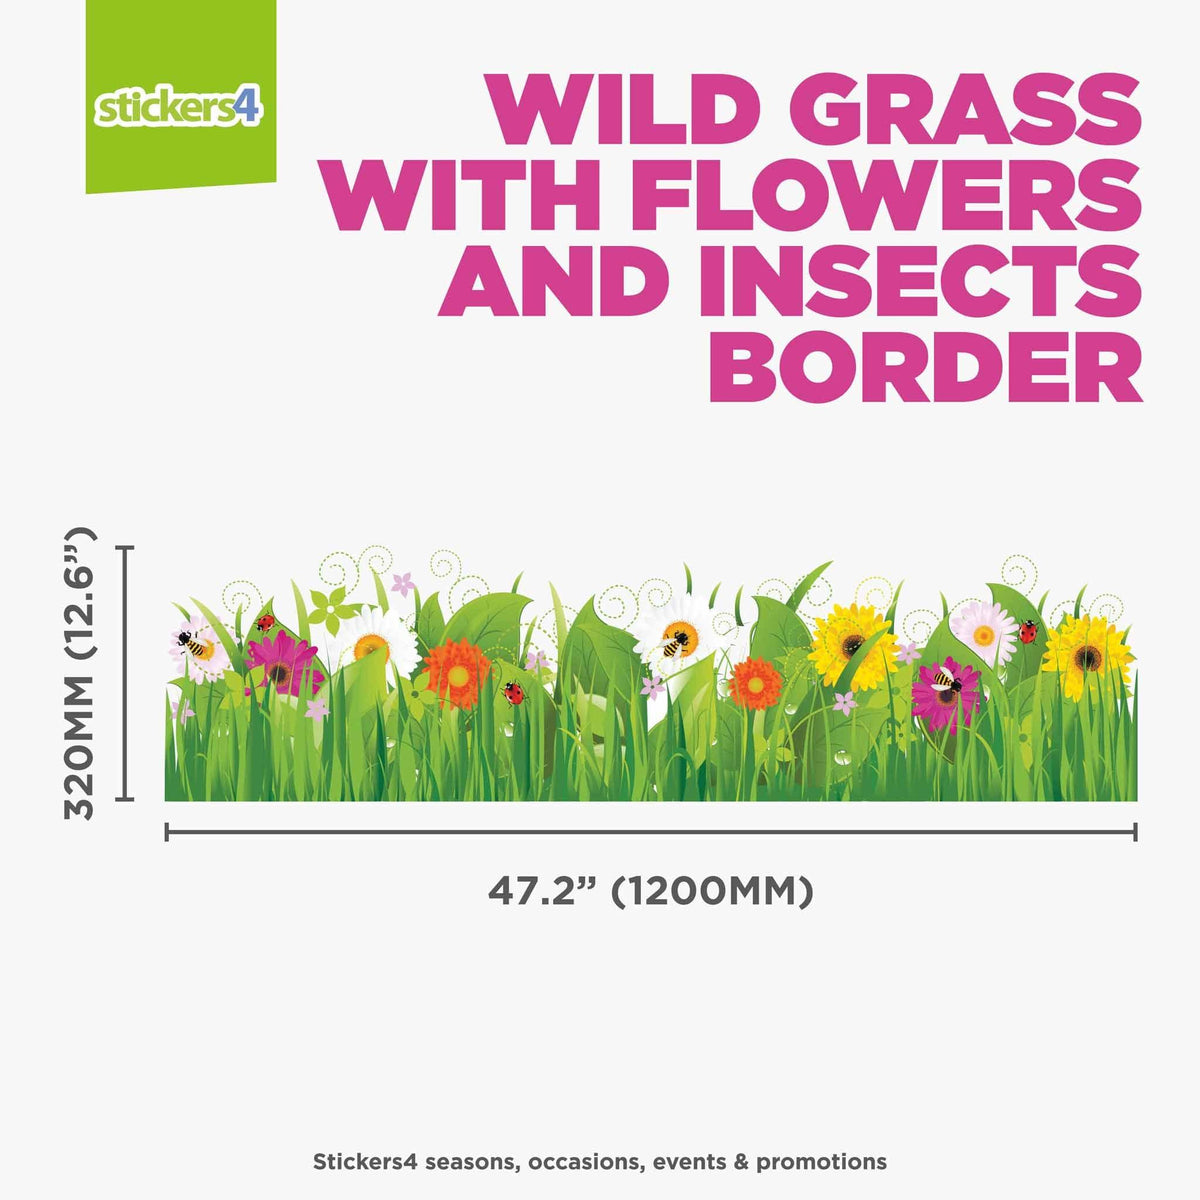 Wild Grass with Flowers and Insects Border